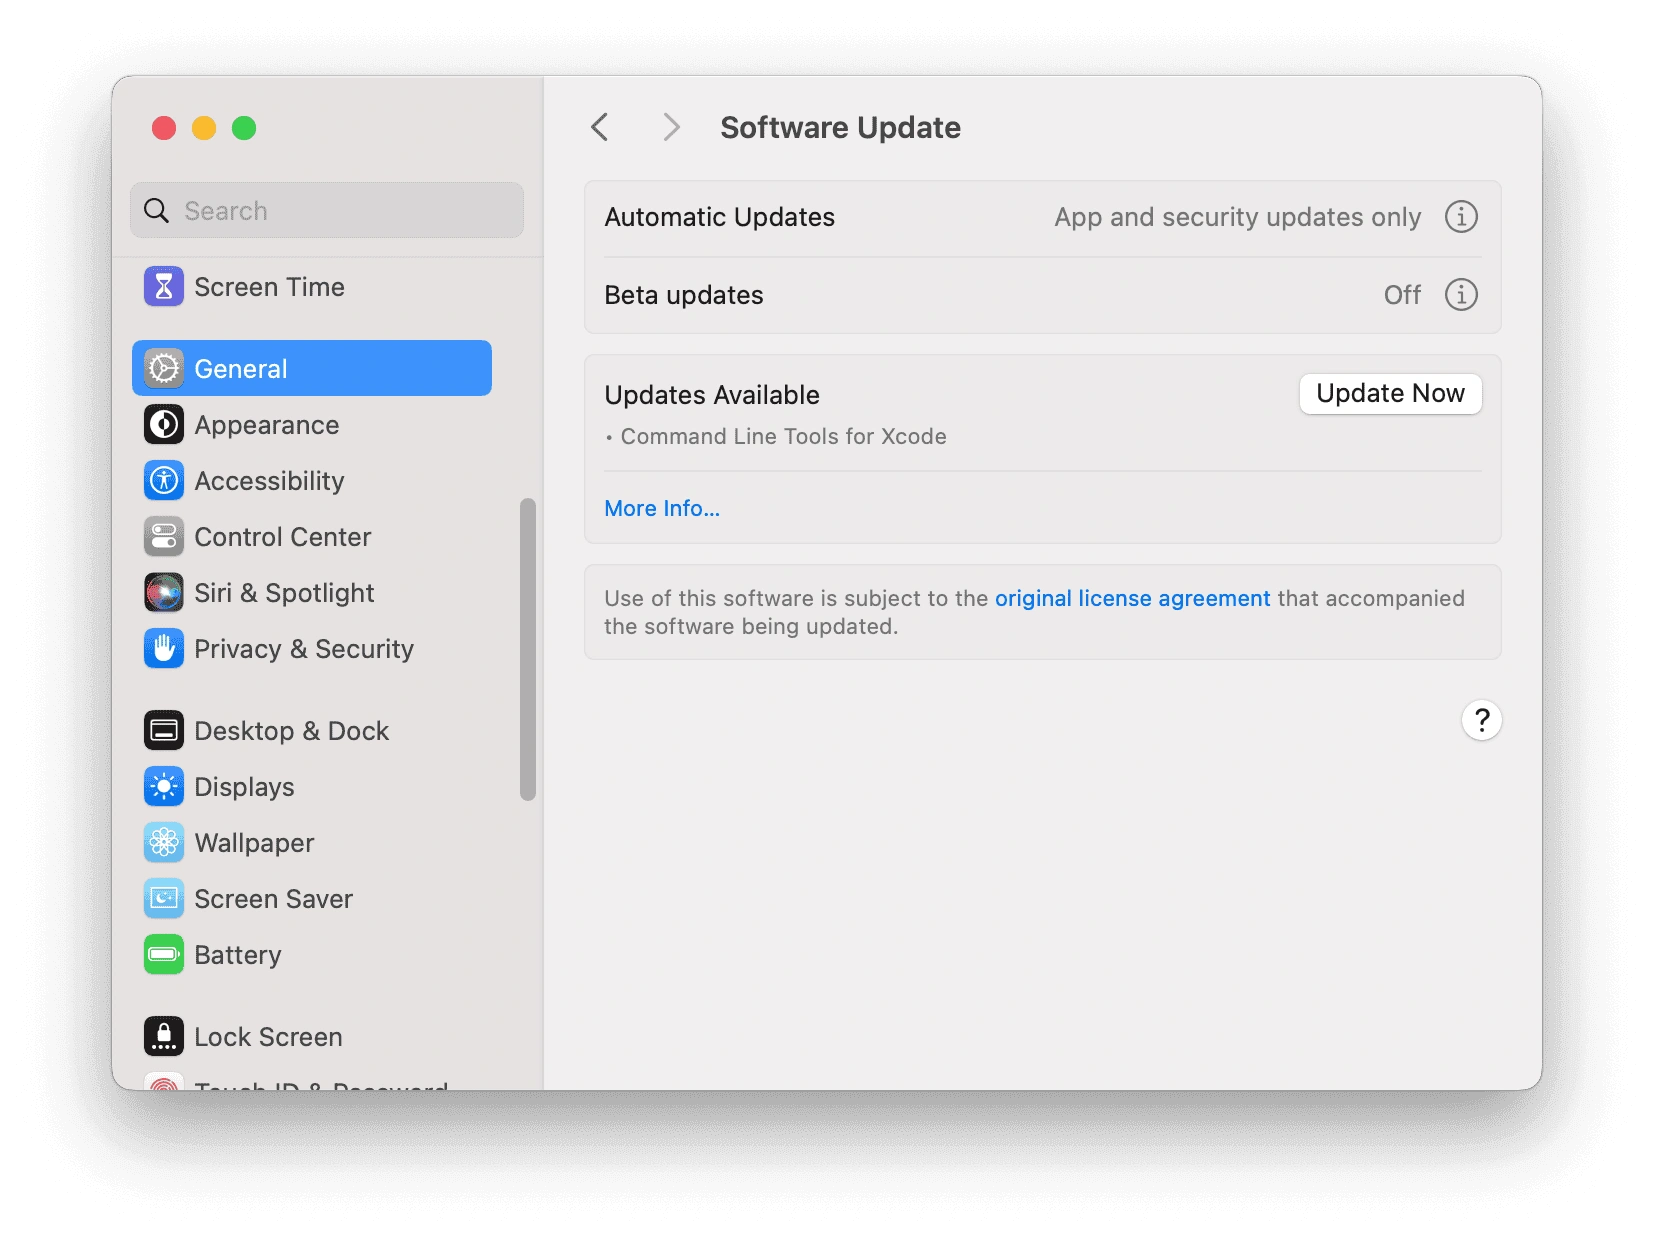 Check for Software Update on Mac